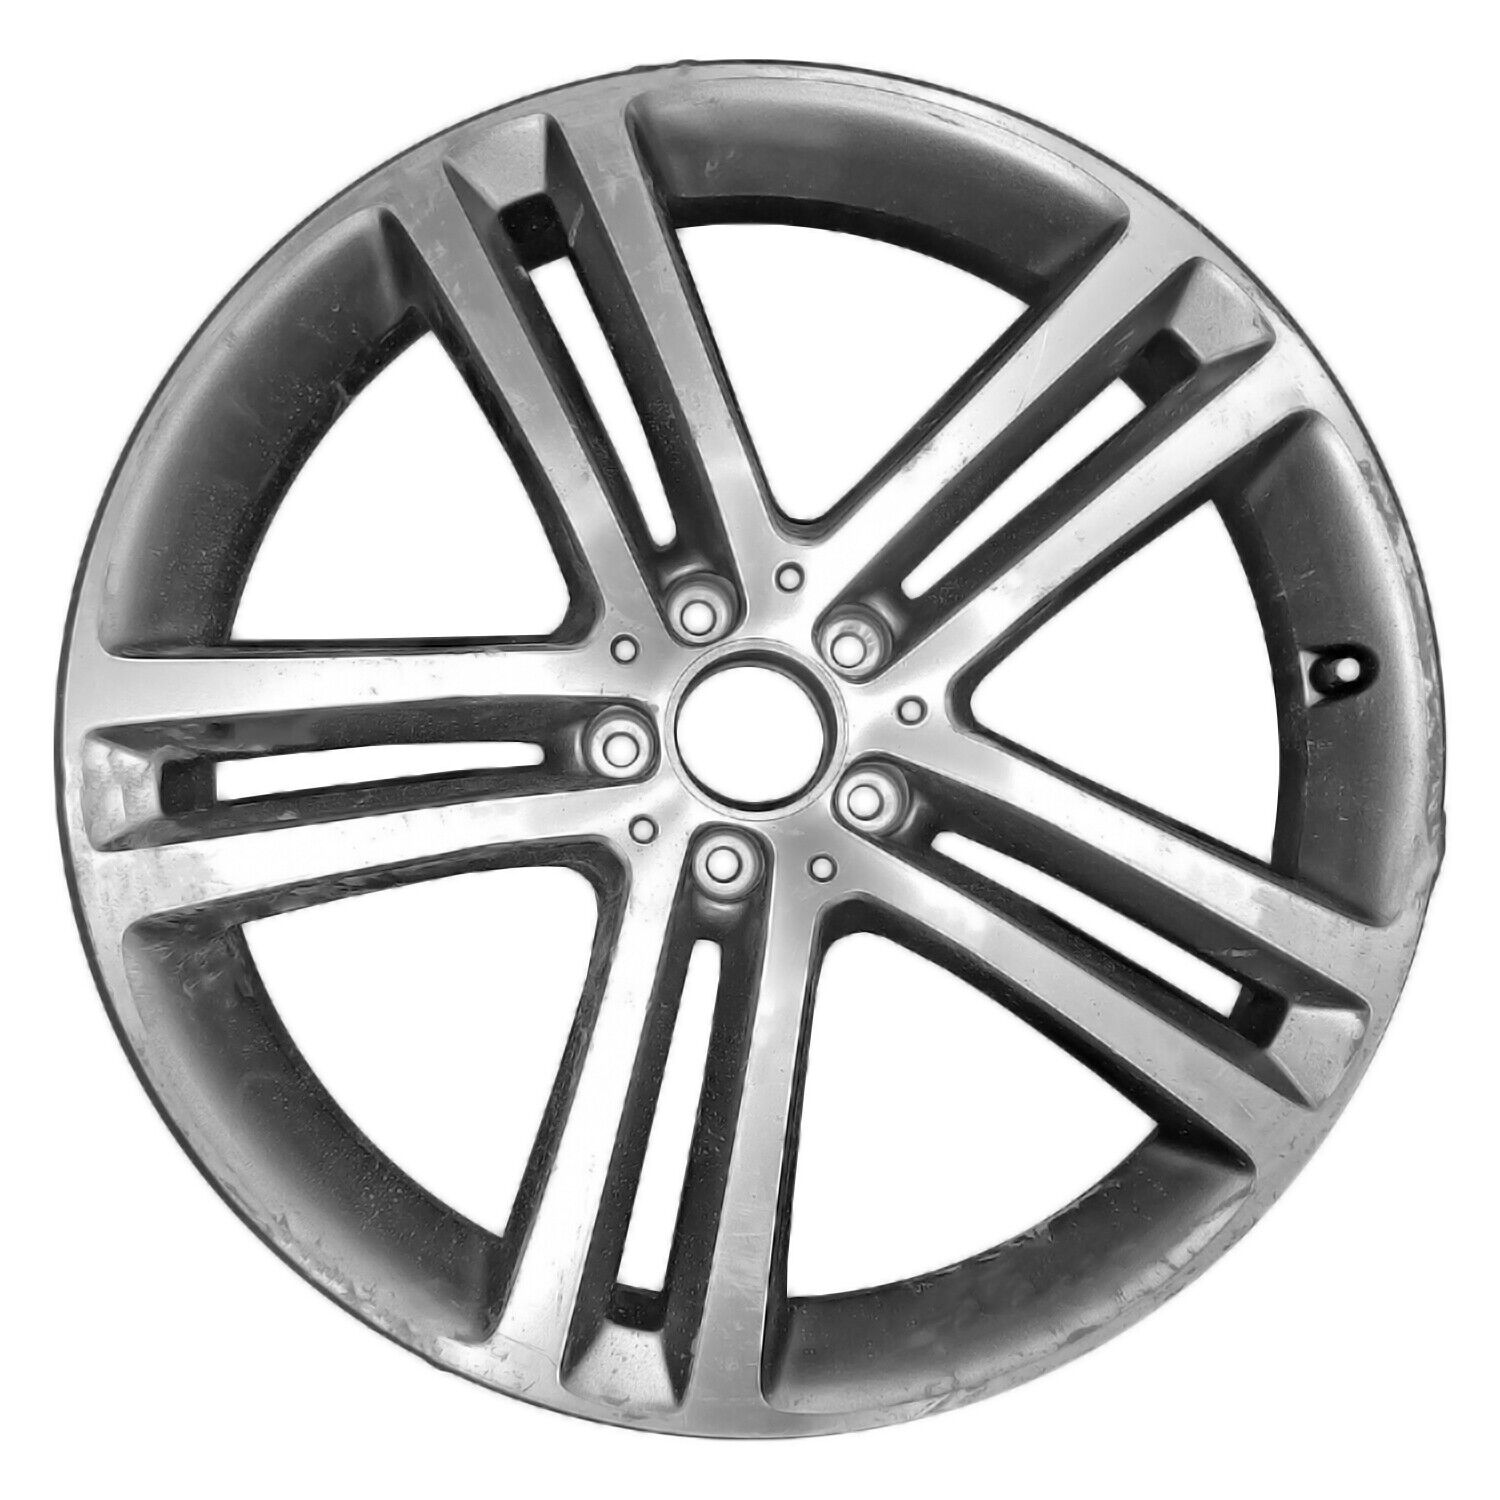 95038 Reconditioned OEM Front Aluminum Wheel 20x8.5 fits 2020 Audi S8